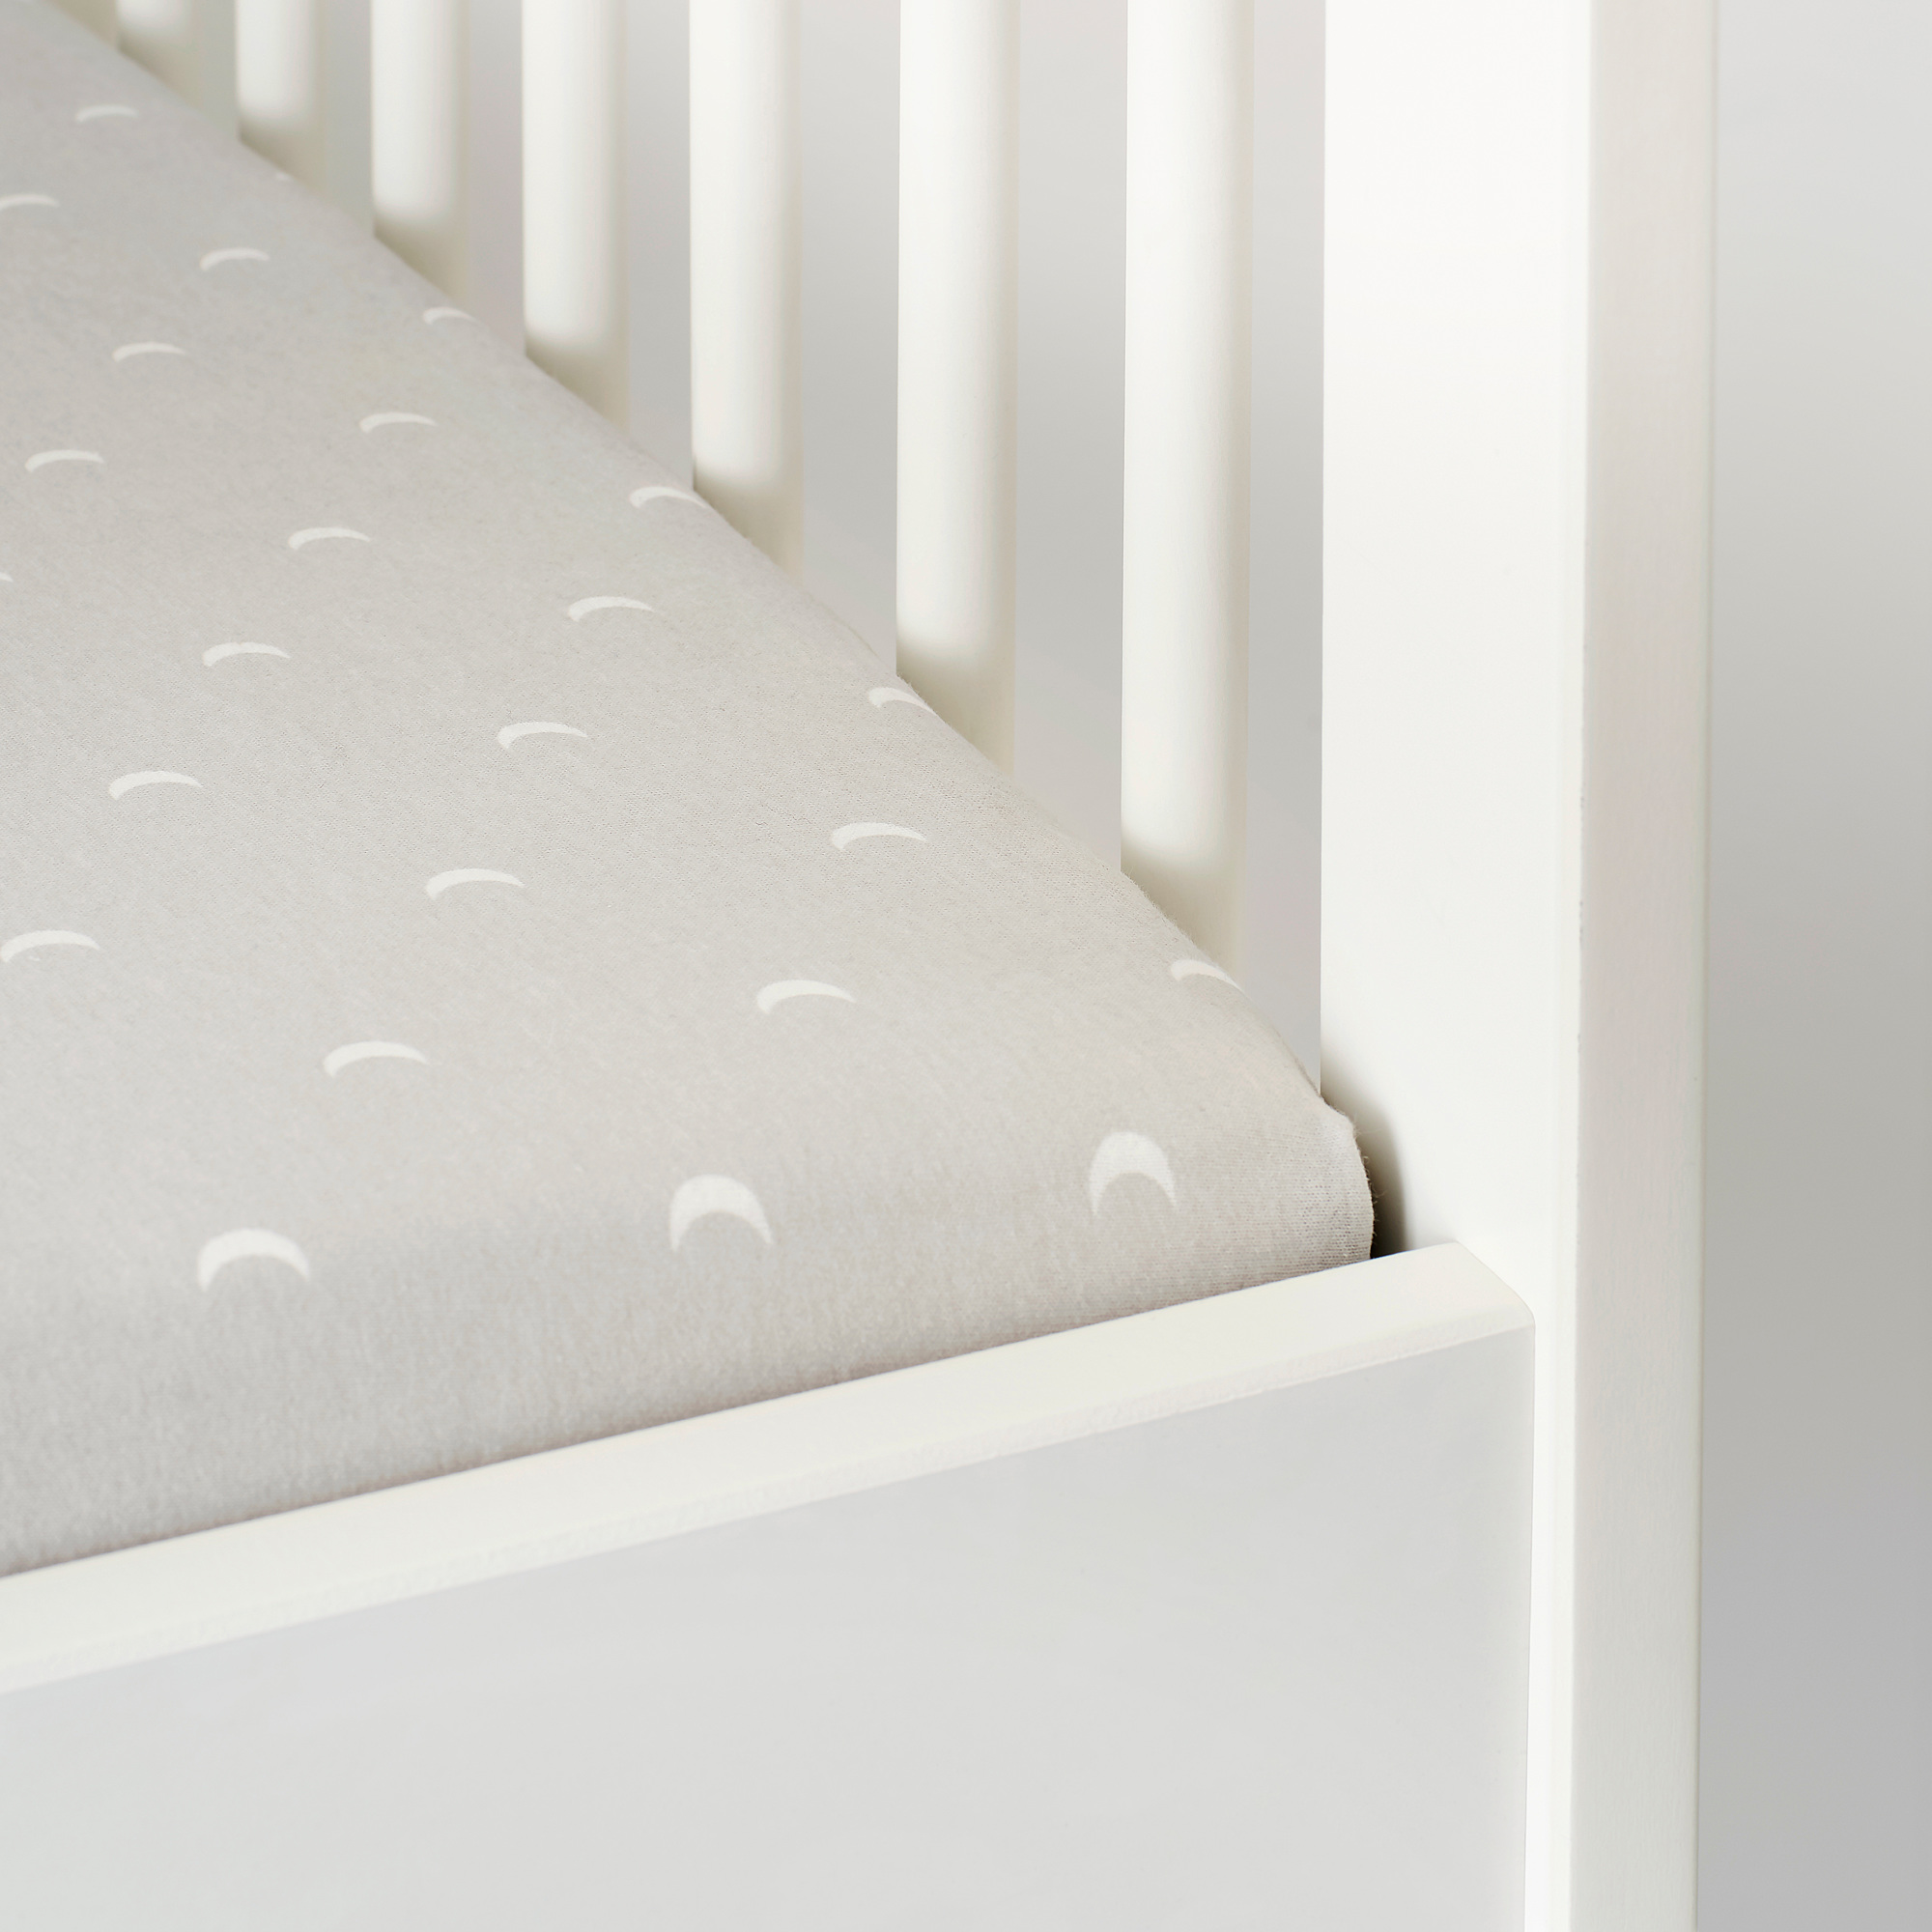 LENAST fitted sheet for cot